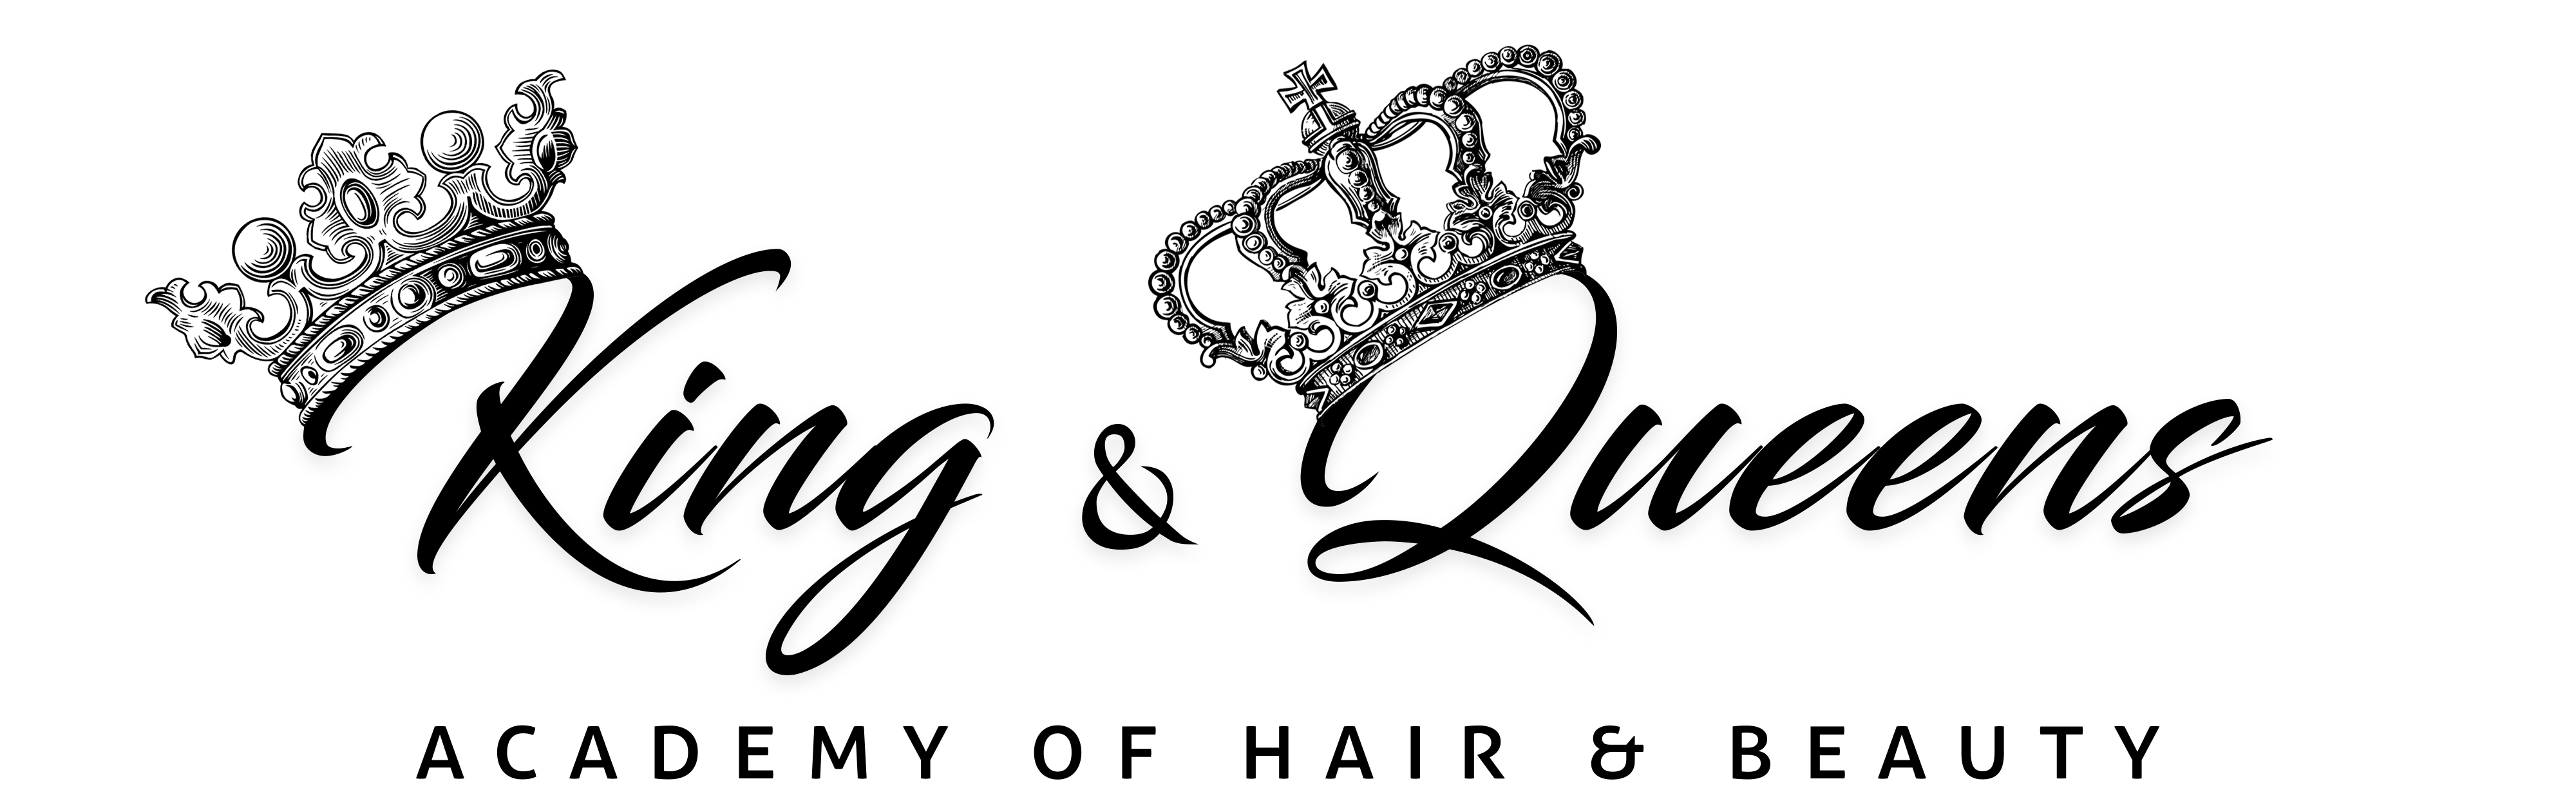 Queen Logo PNG Image Background